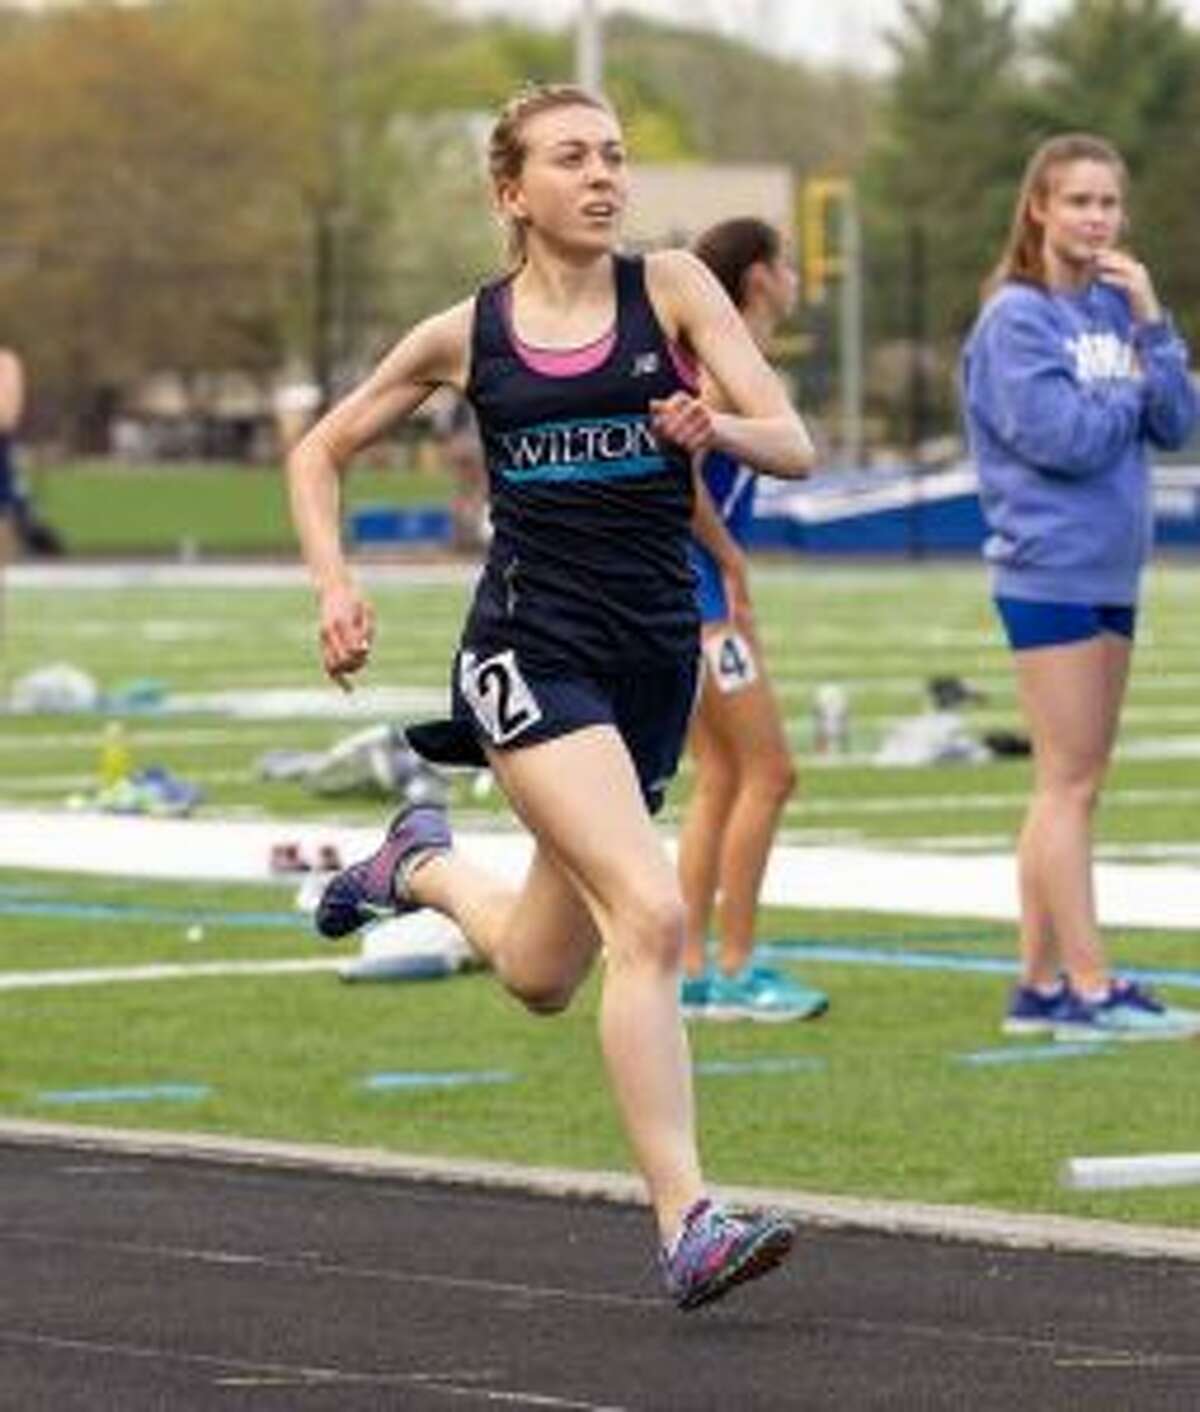 Morgan McCormick broke the Wilton girls track record in the 3200 meters on Monday as she won the event at the FCIAC championships. — GretchenMcMahonPhotography.com